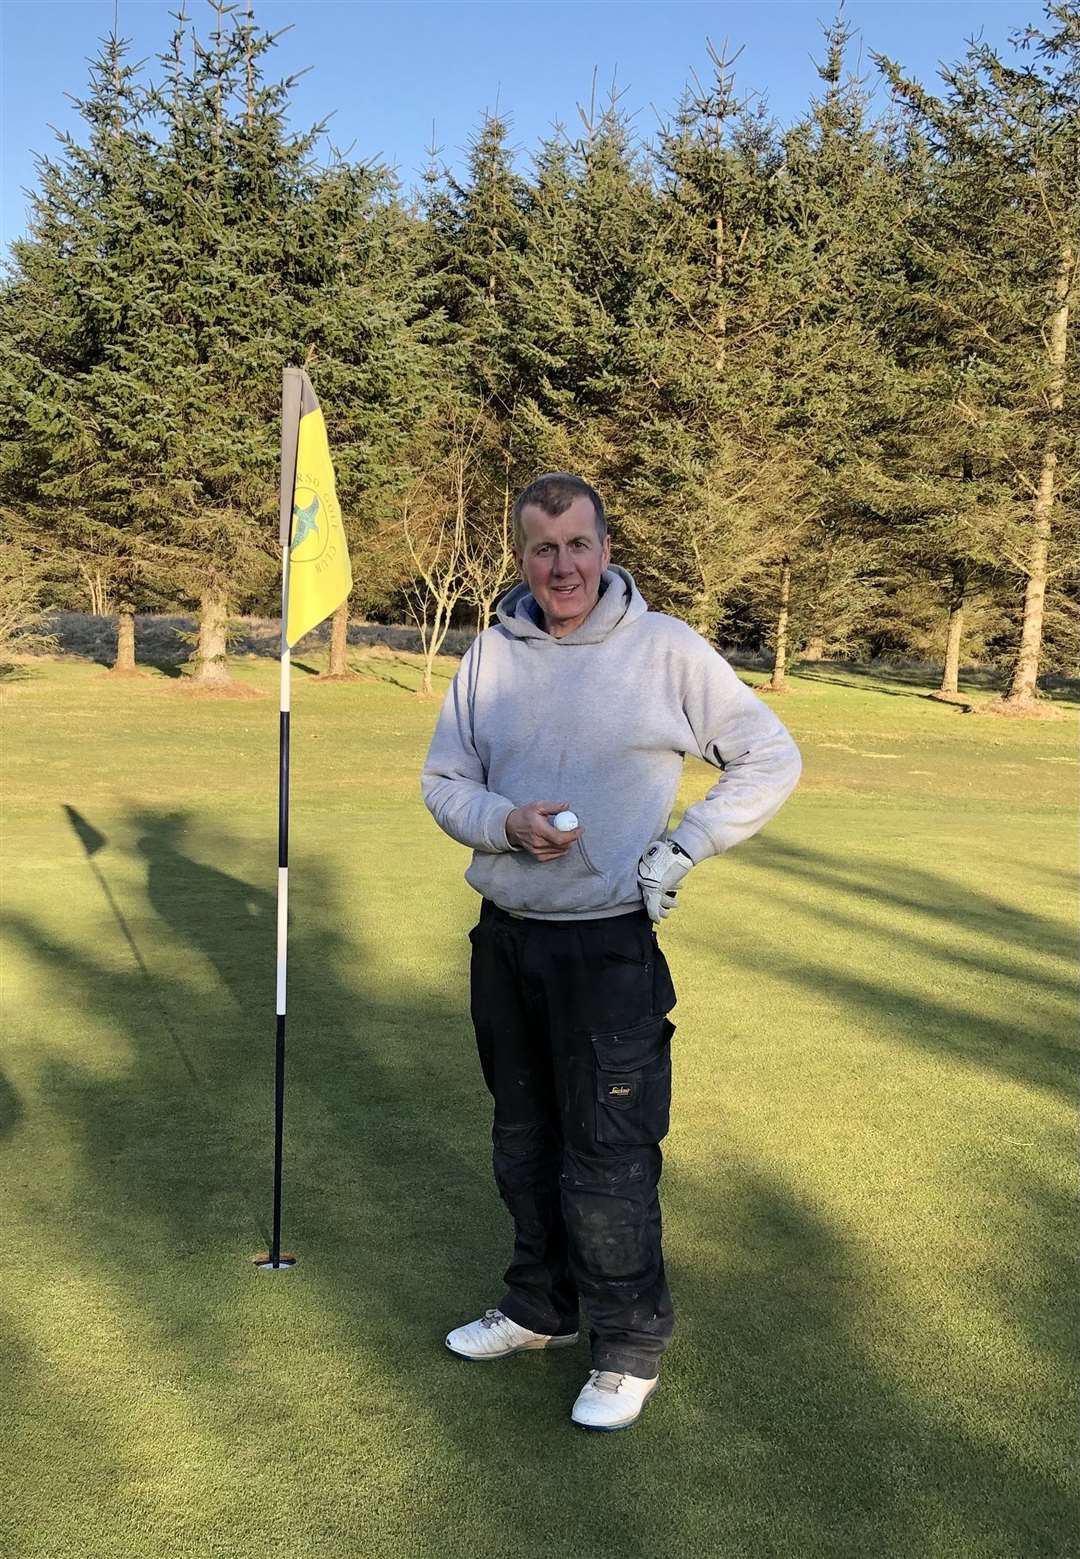 Jim Sangster was the first golfer to achieve a hole in one at Thurso this season. It came at the ninth, using a 6 iron.